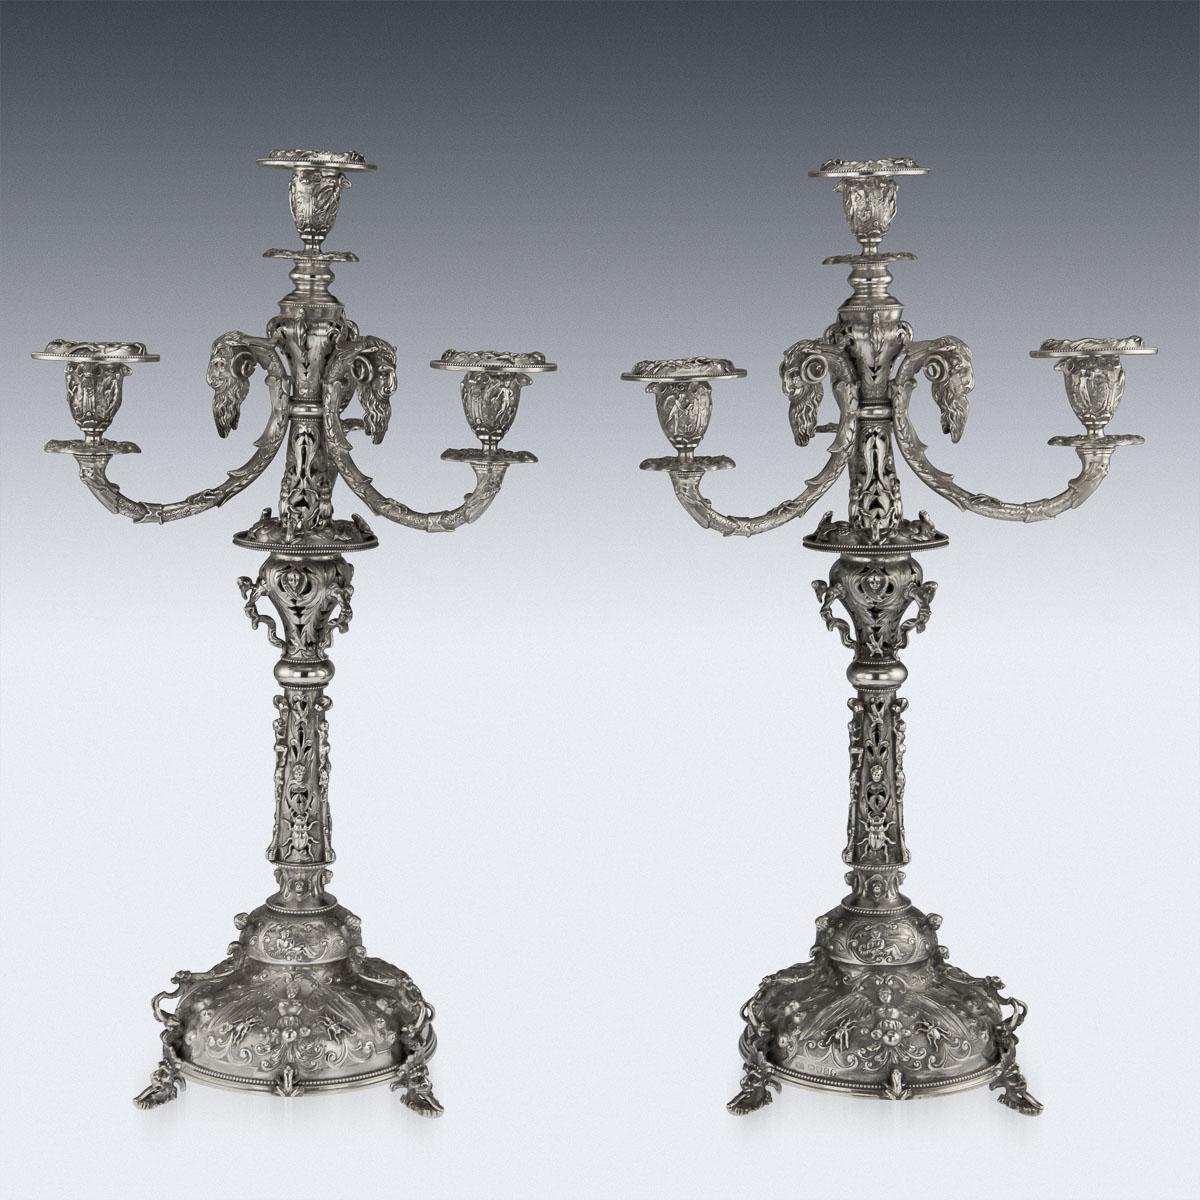 Victorian Solid Silver Set of Four Candelabras, Macrae, circa 1872-1873 For Sale 2